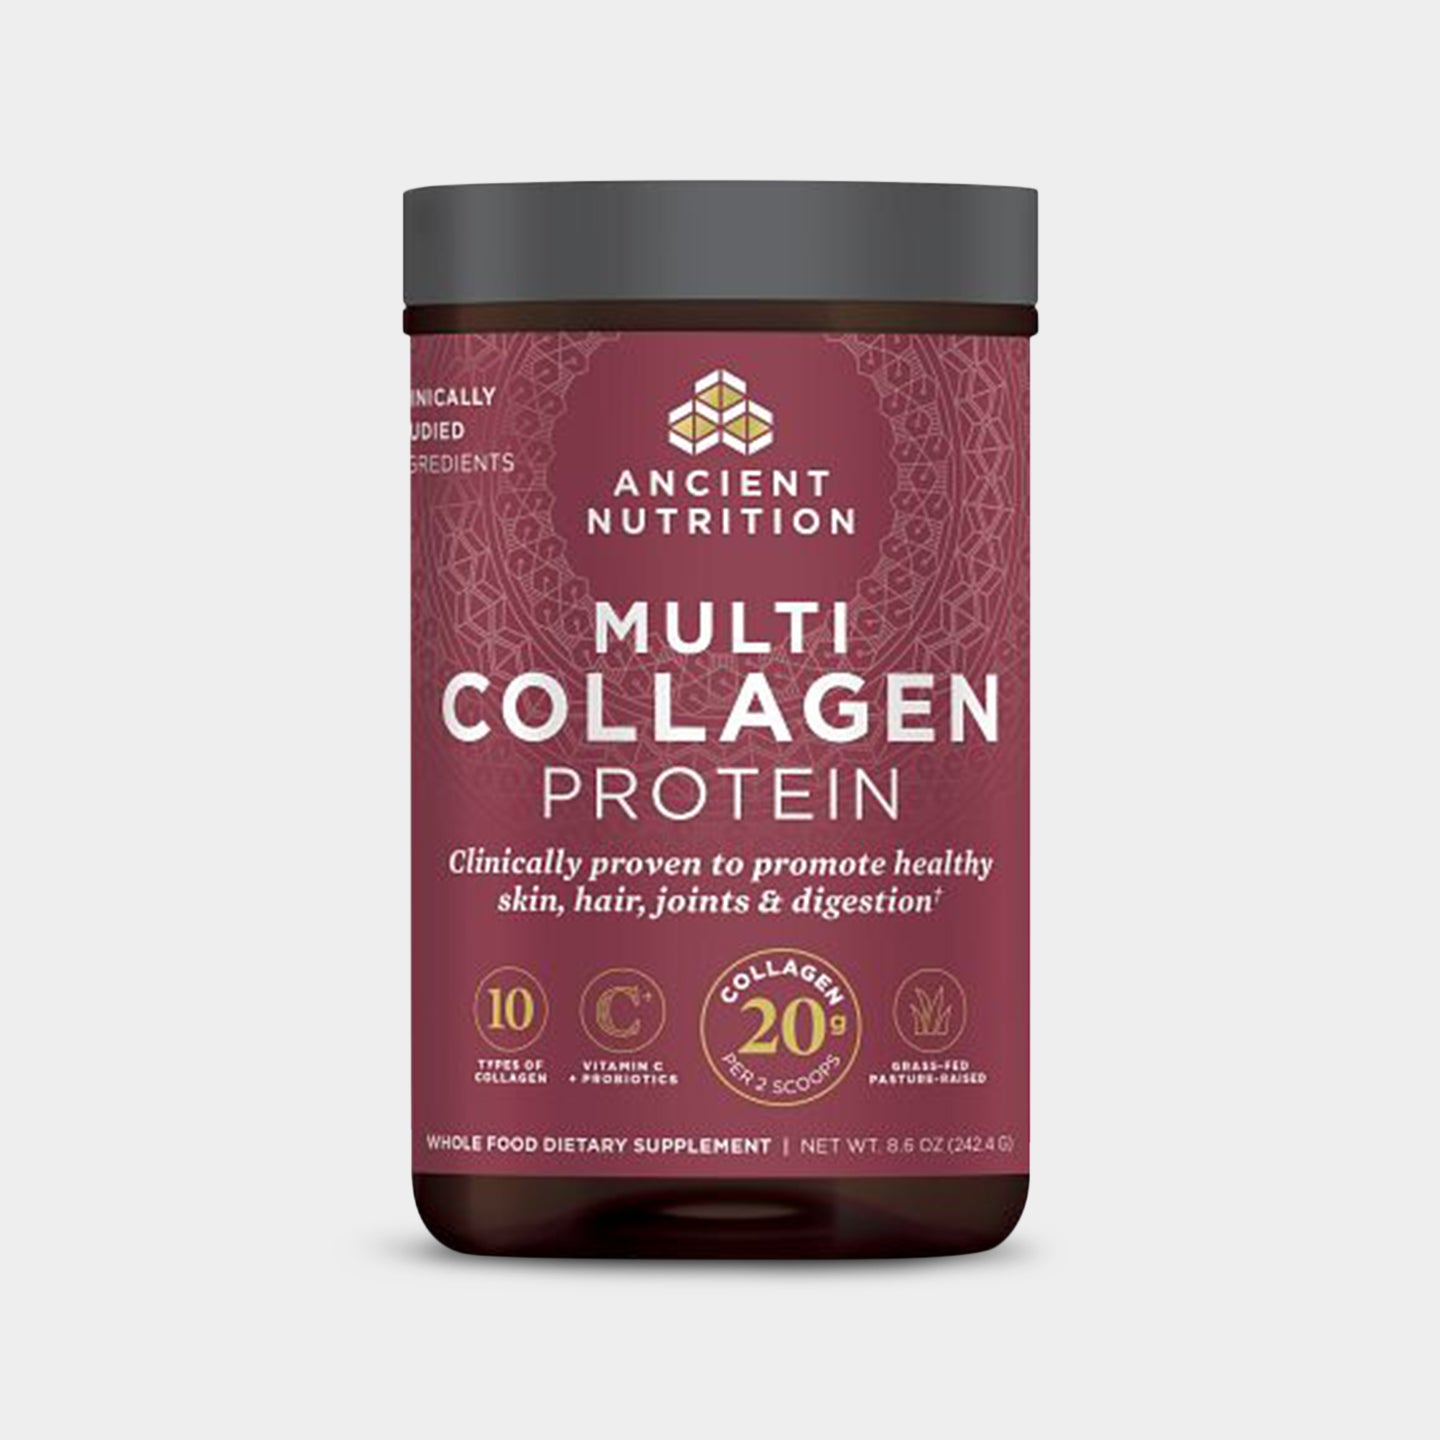 Ancient Nutrition Multi Collagen Protein - 20g, Pure, 24 Servings A1